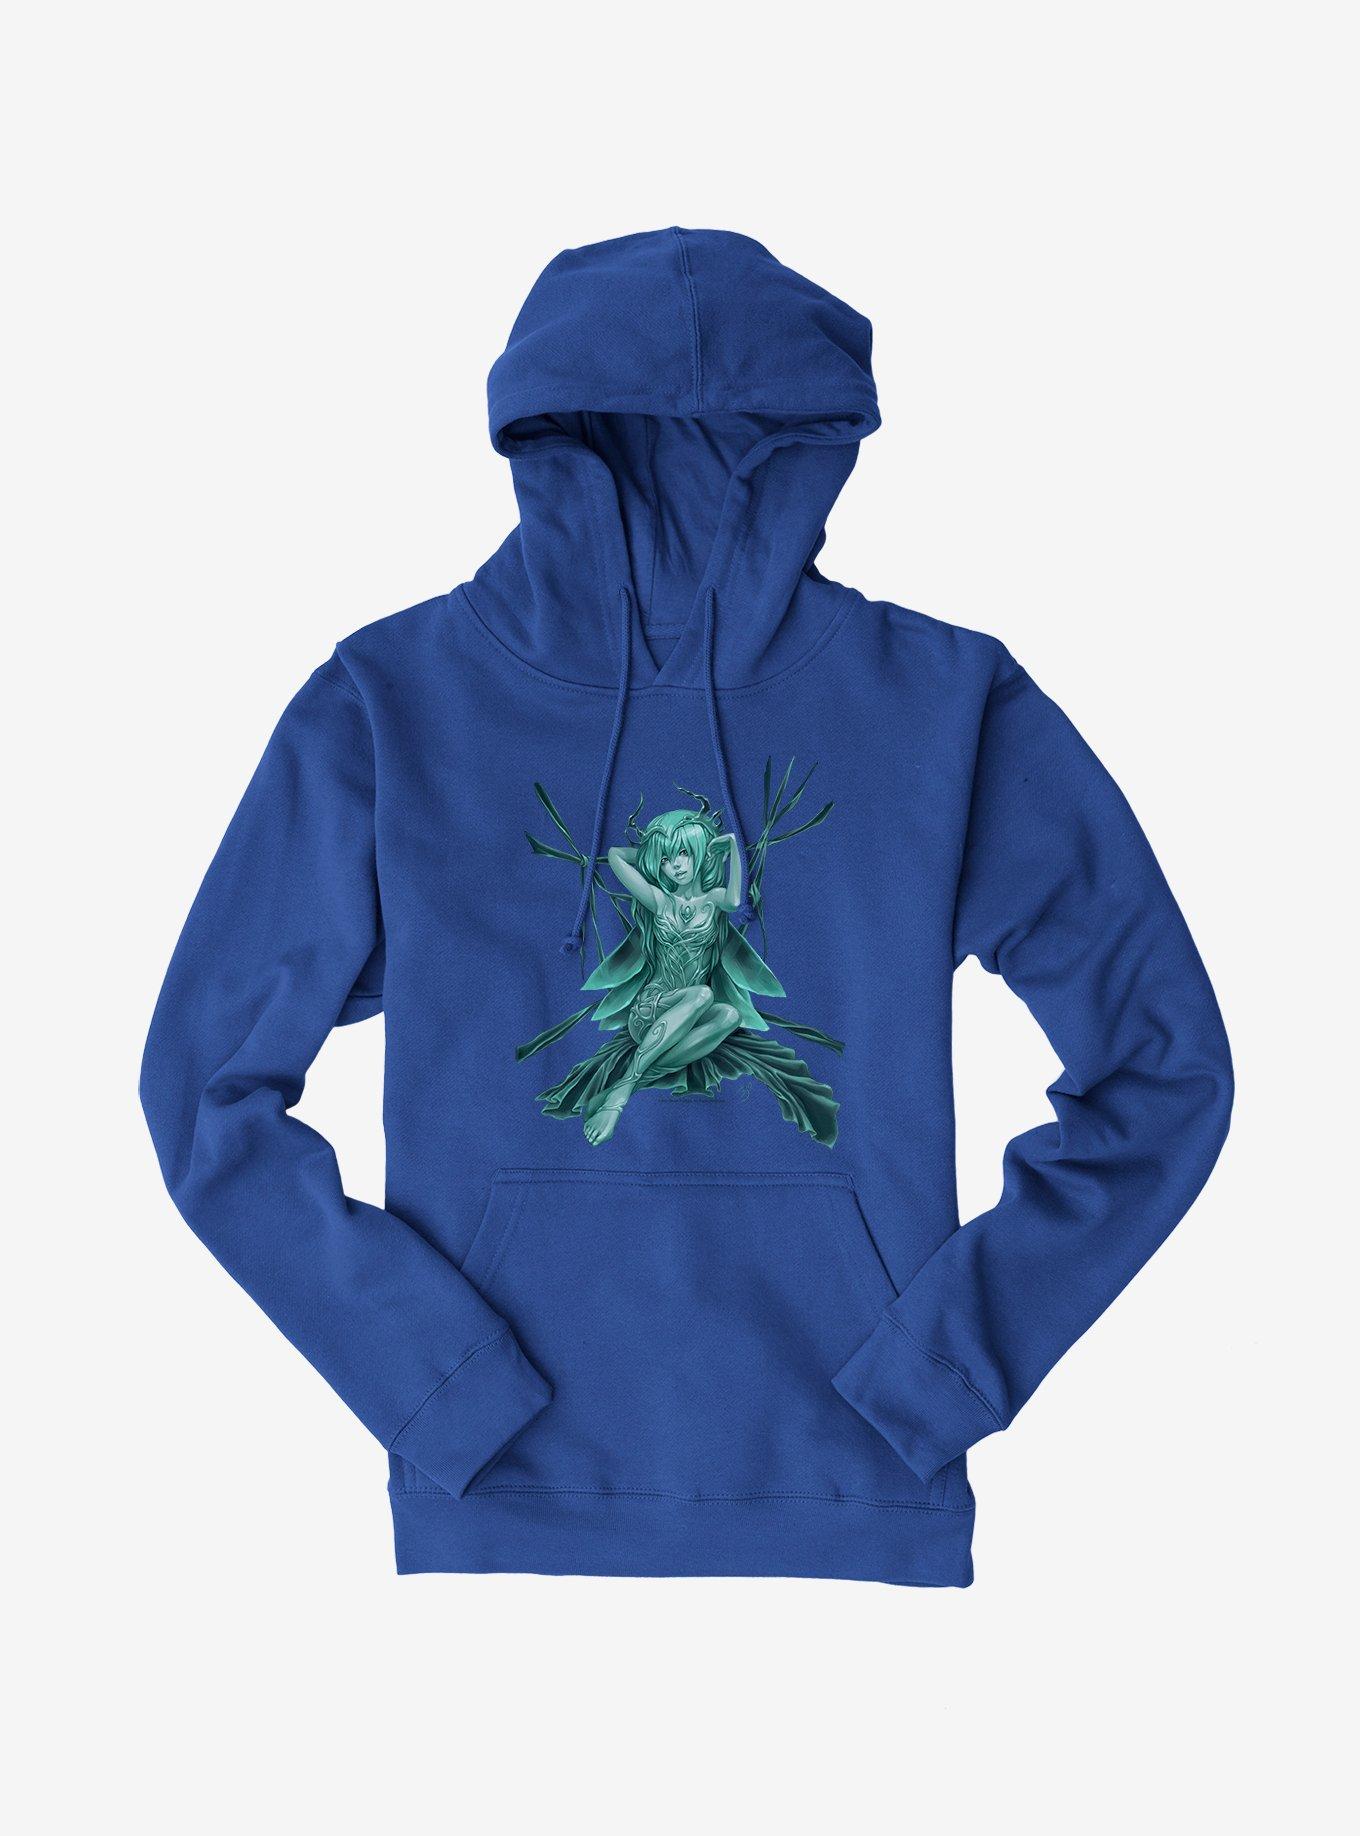 Fairies By Trick Turquoise Fairy Hoodie